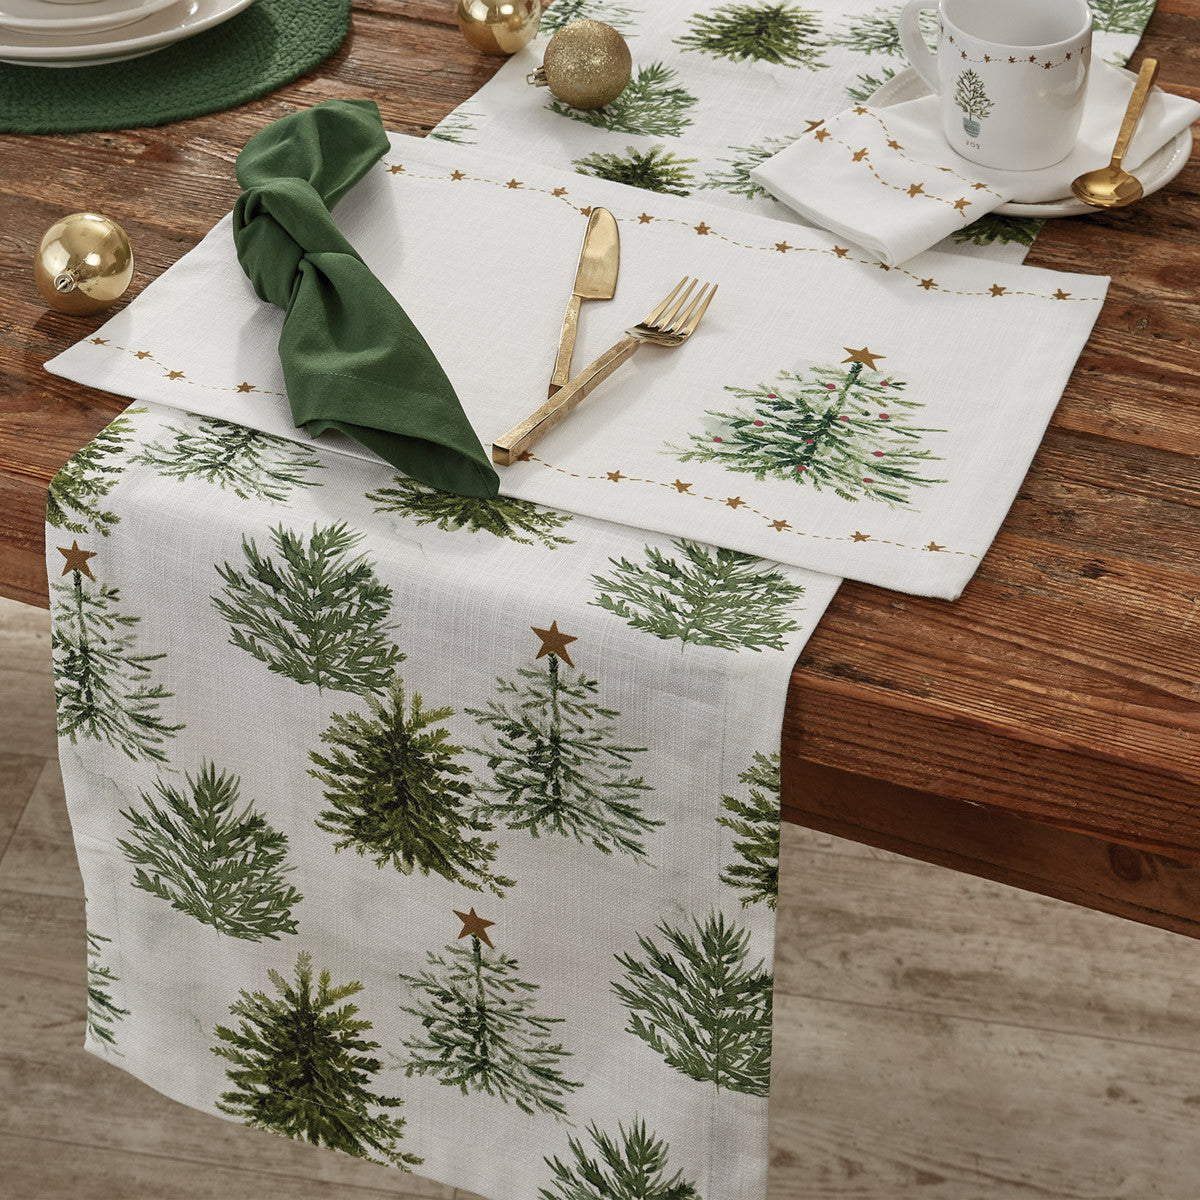 Rustic Christmas Placemats - Stars Set of 4 Park Designs